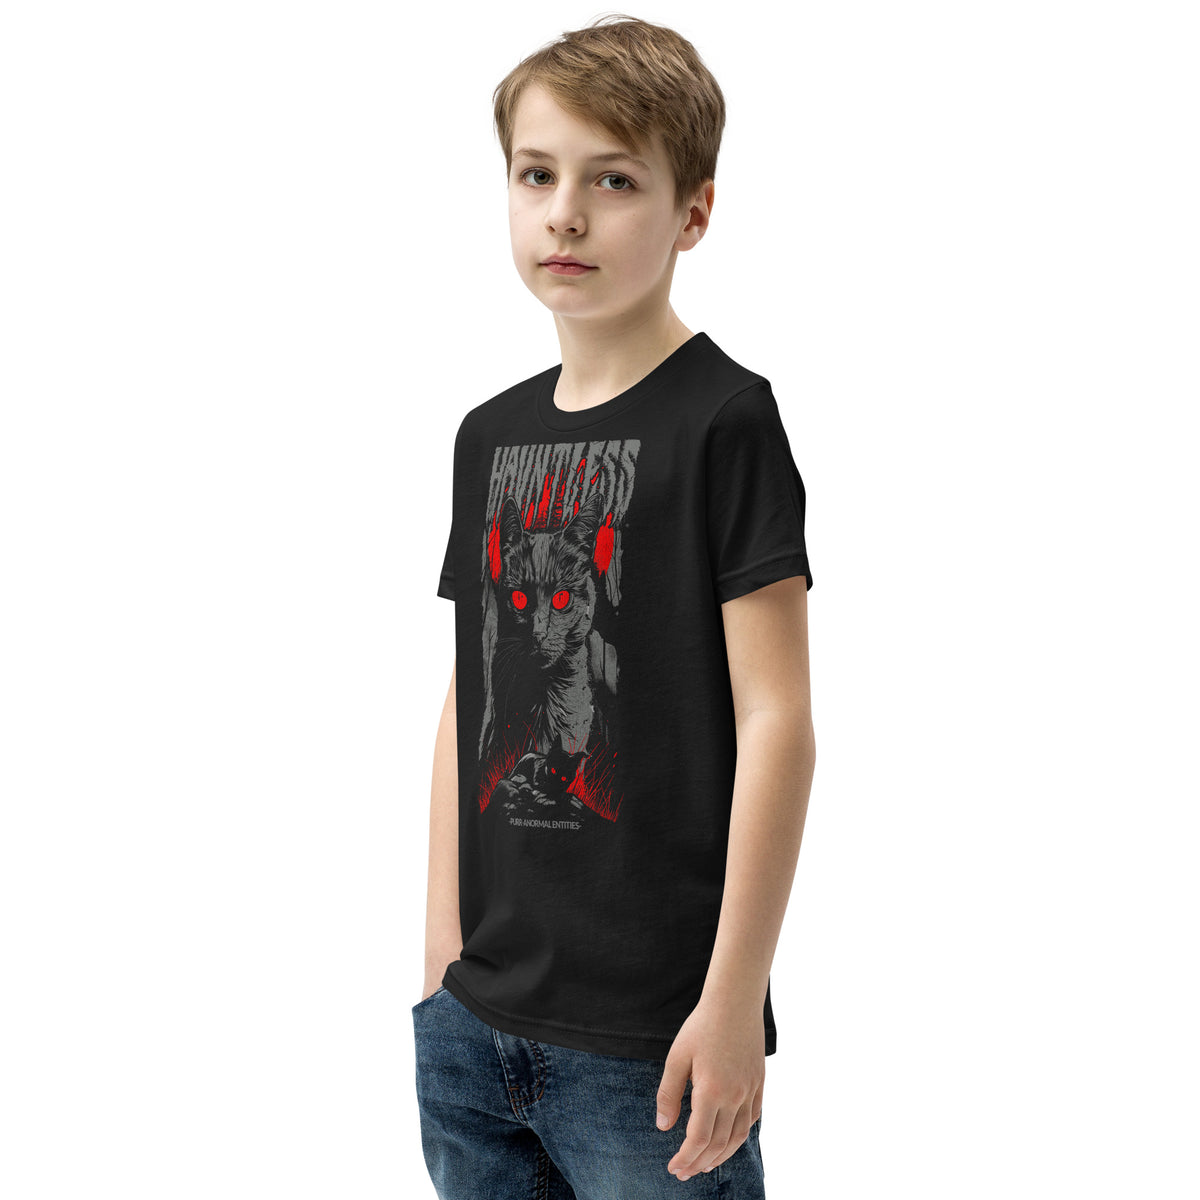 PURR-ANORMAL ENTITIES YOUTH TEE